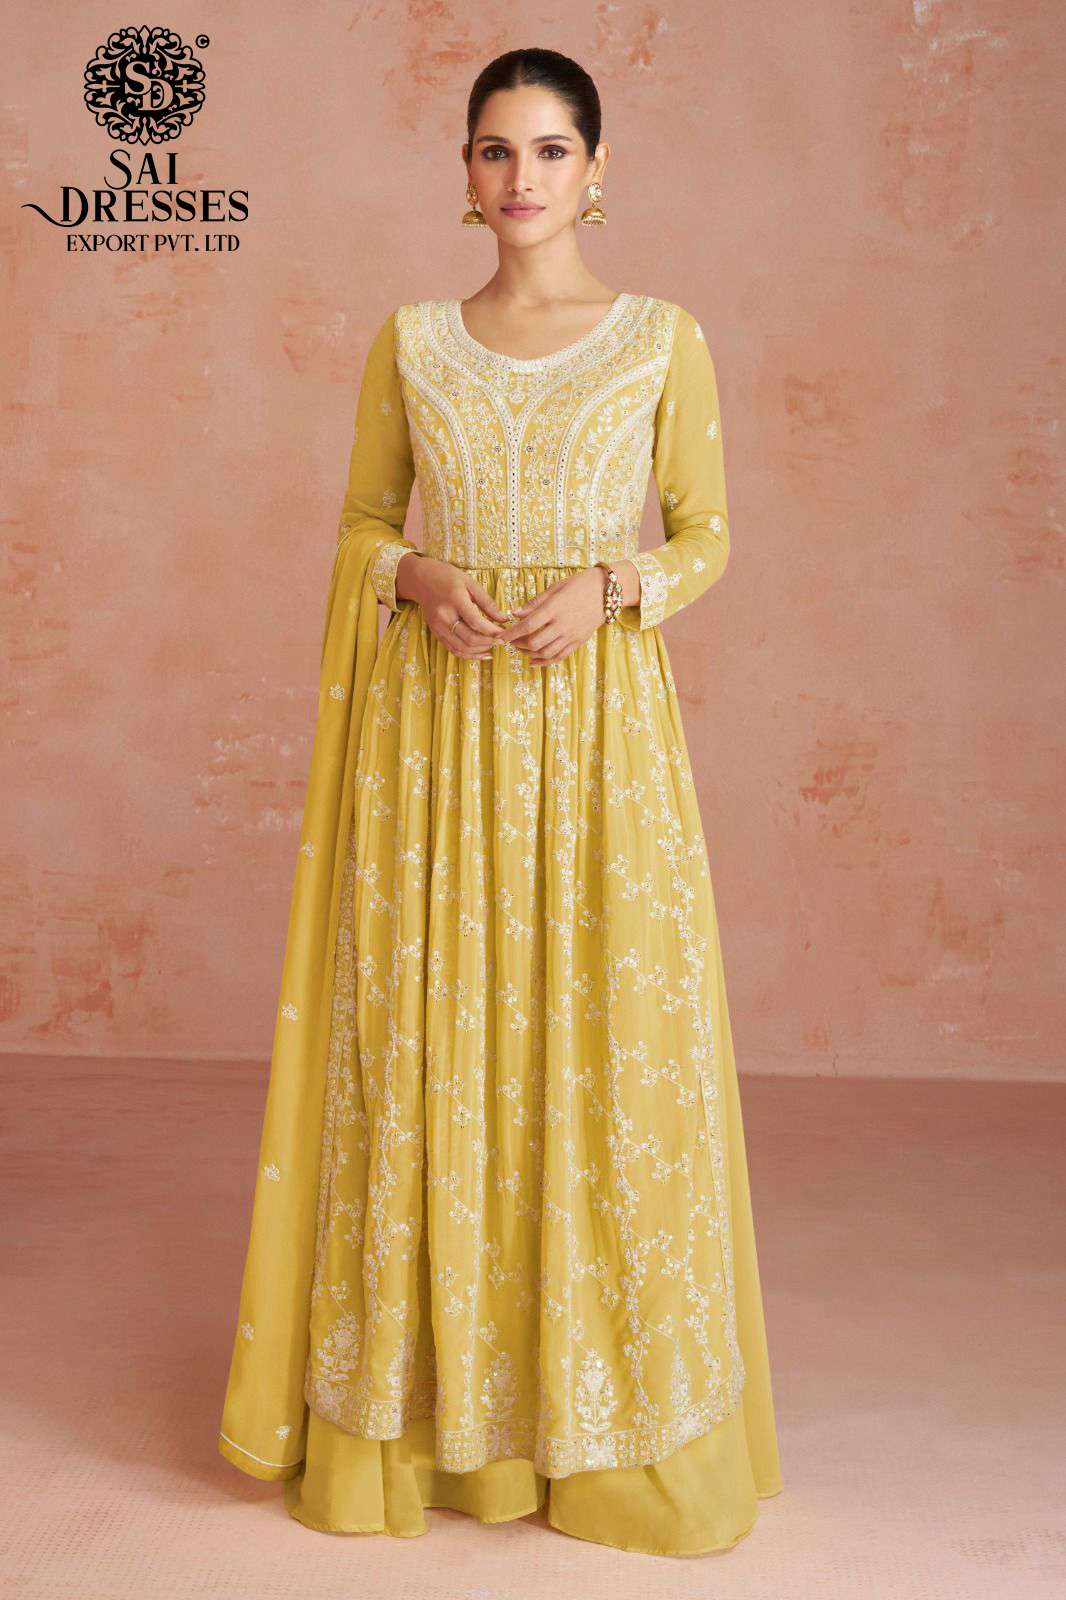 SAI DRESSES PRESENT INAYA READYMADE WEDDING WEAR NAYRA CUT PLAZZO STYLE DESIGNER SUITS IN WHOLESALE RATE IN SURAT